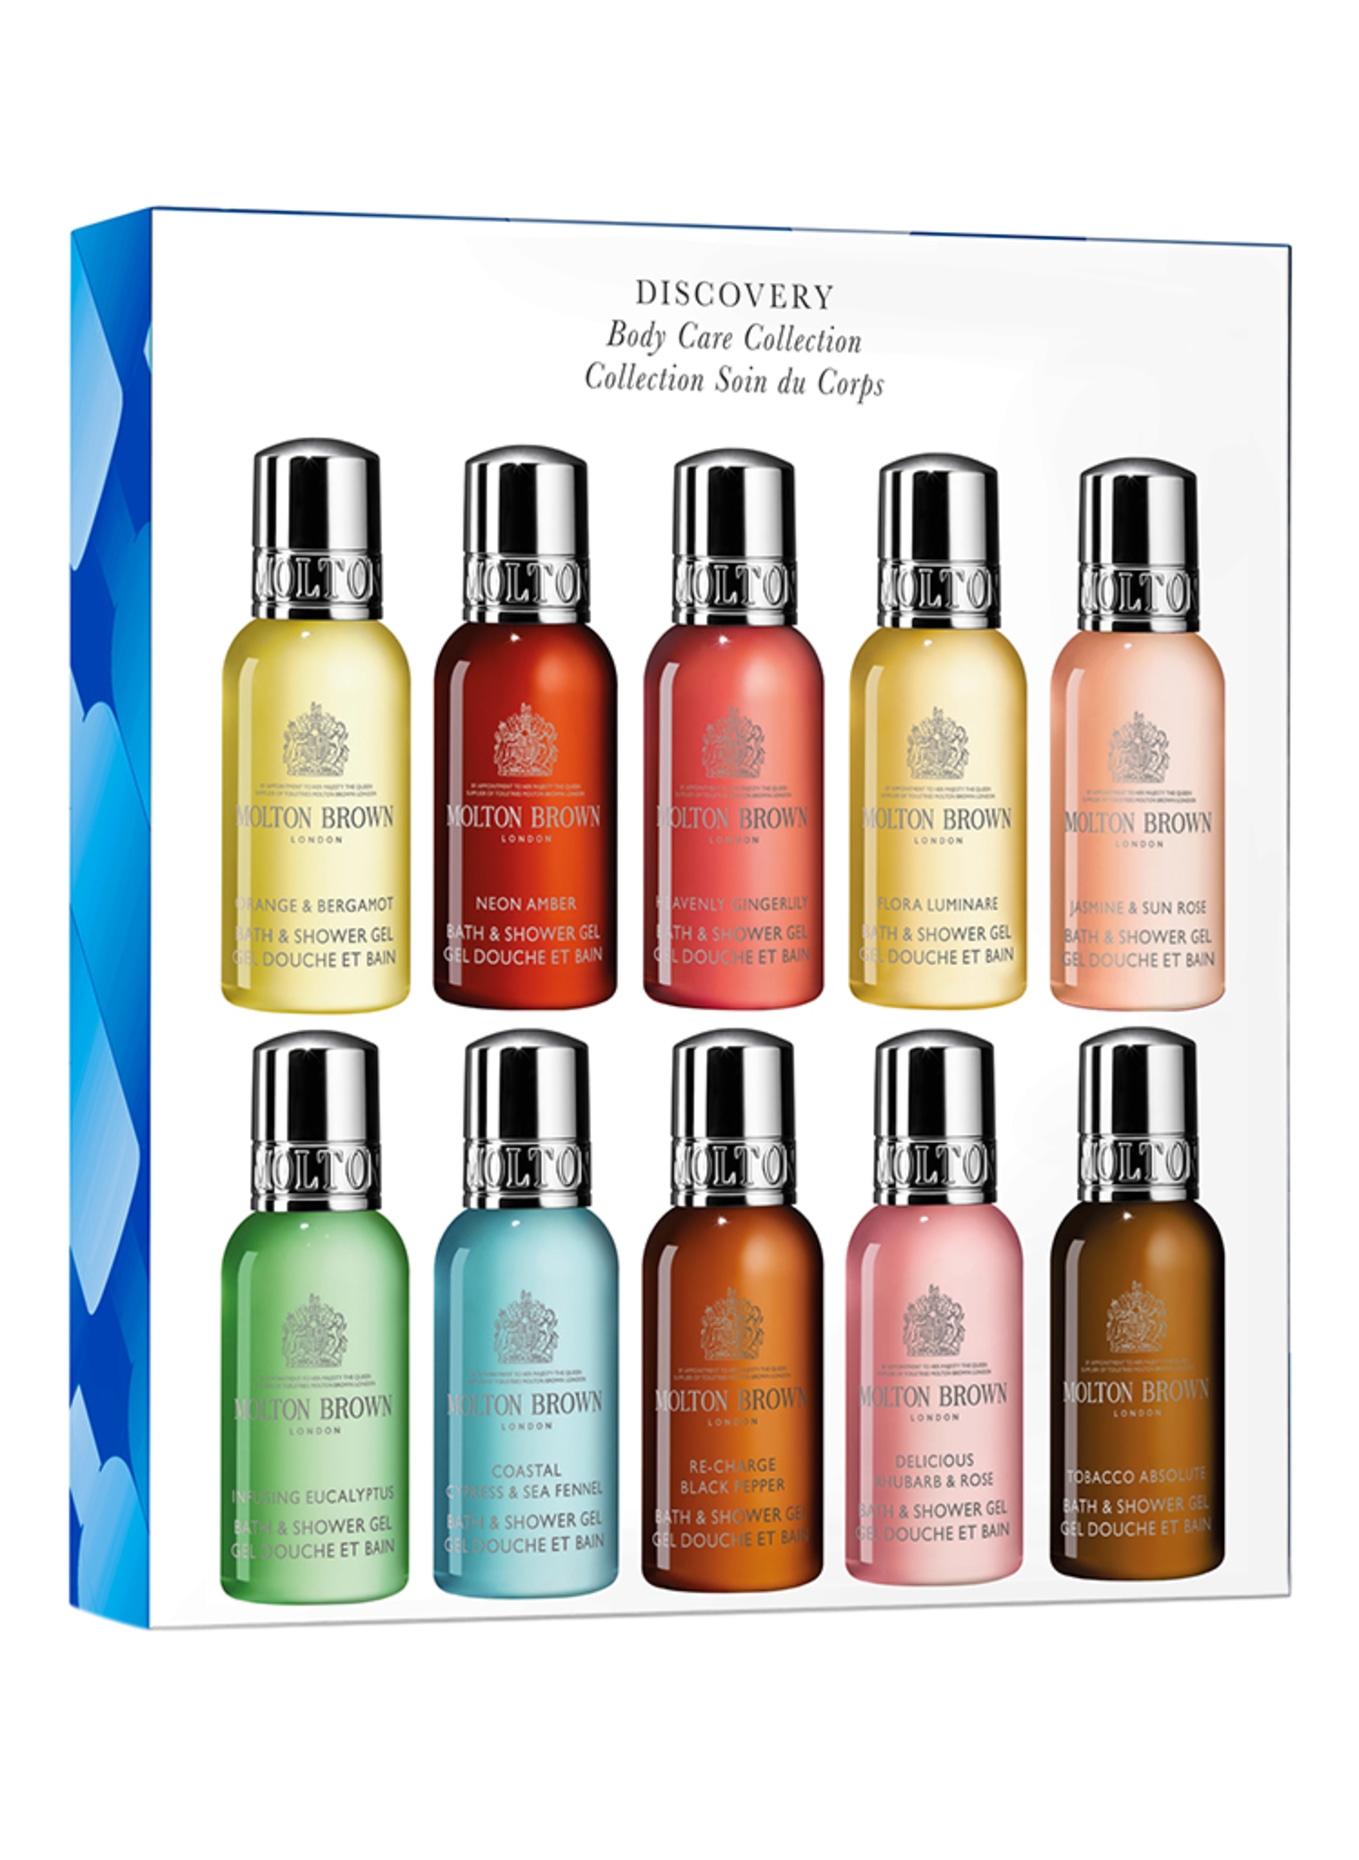 MOLTON BROWN DISCOVERY BODY CARE COLLECTION (Bild 1)